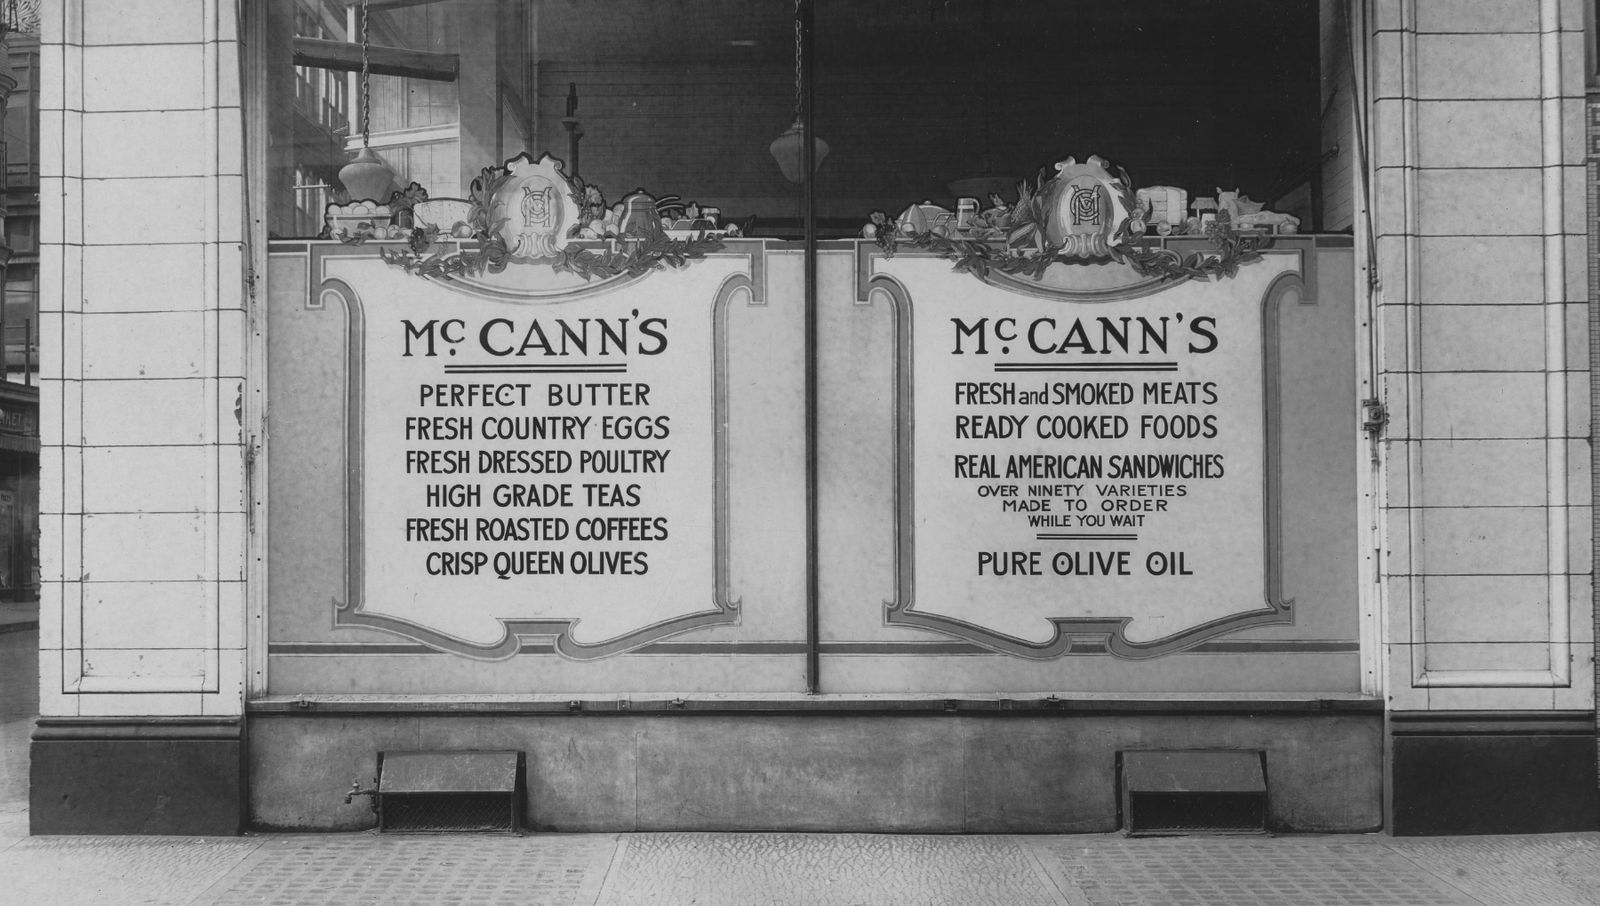 Shop window with two hand-painted decorative panels advertising a variety of food products available within.